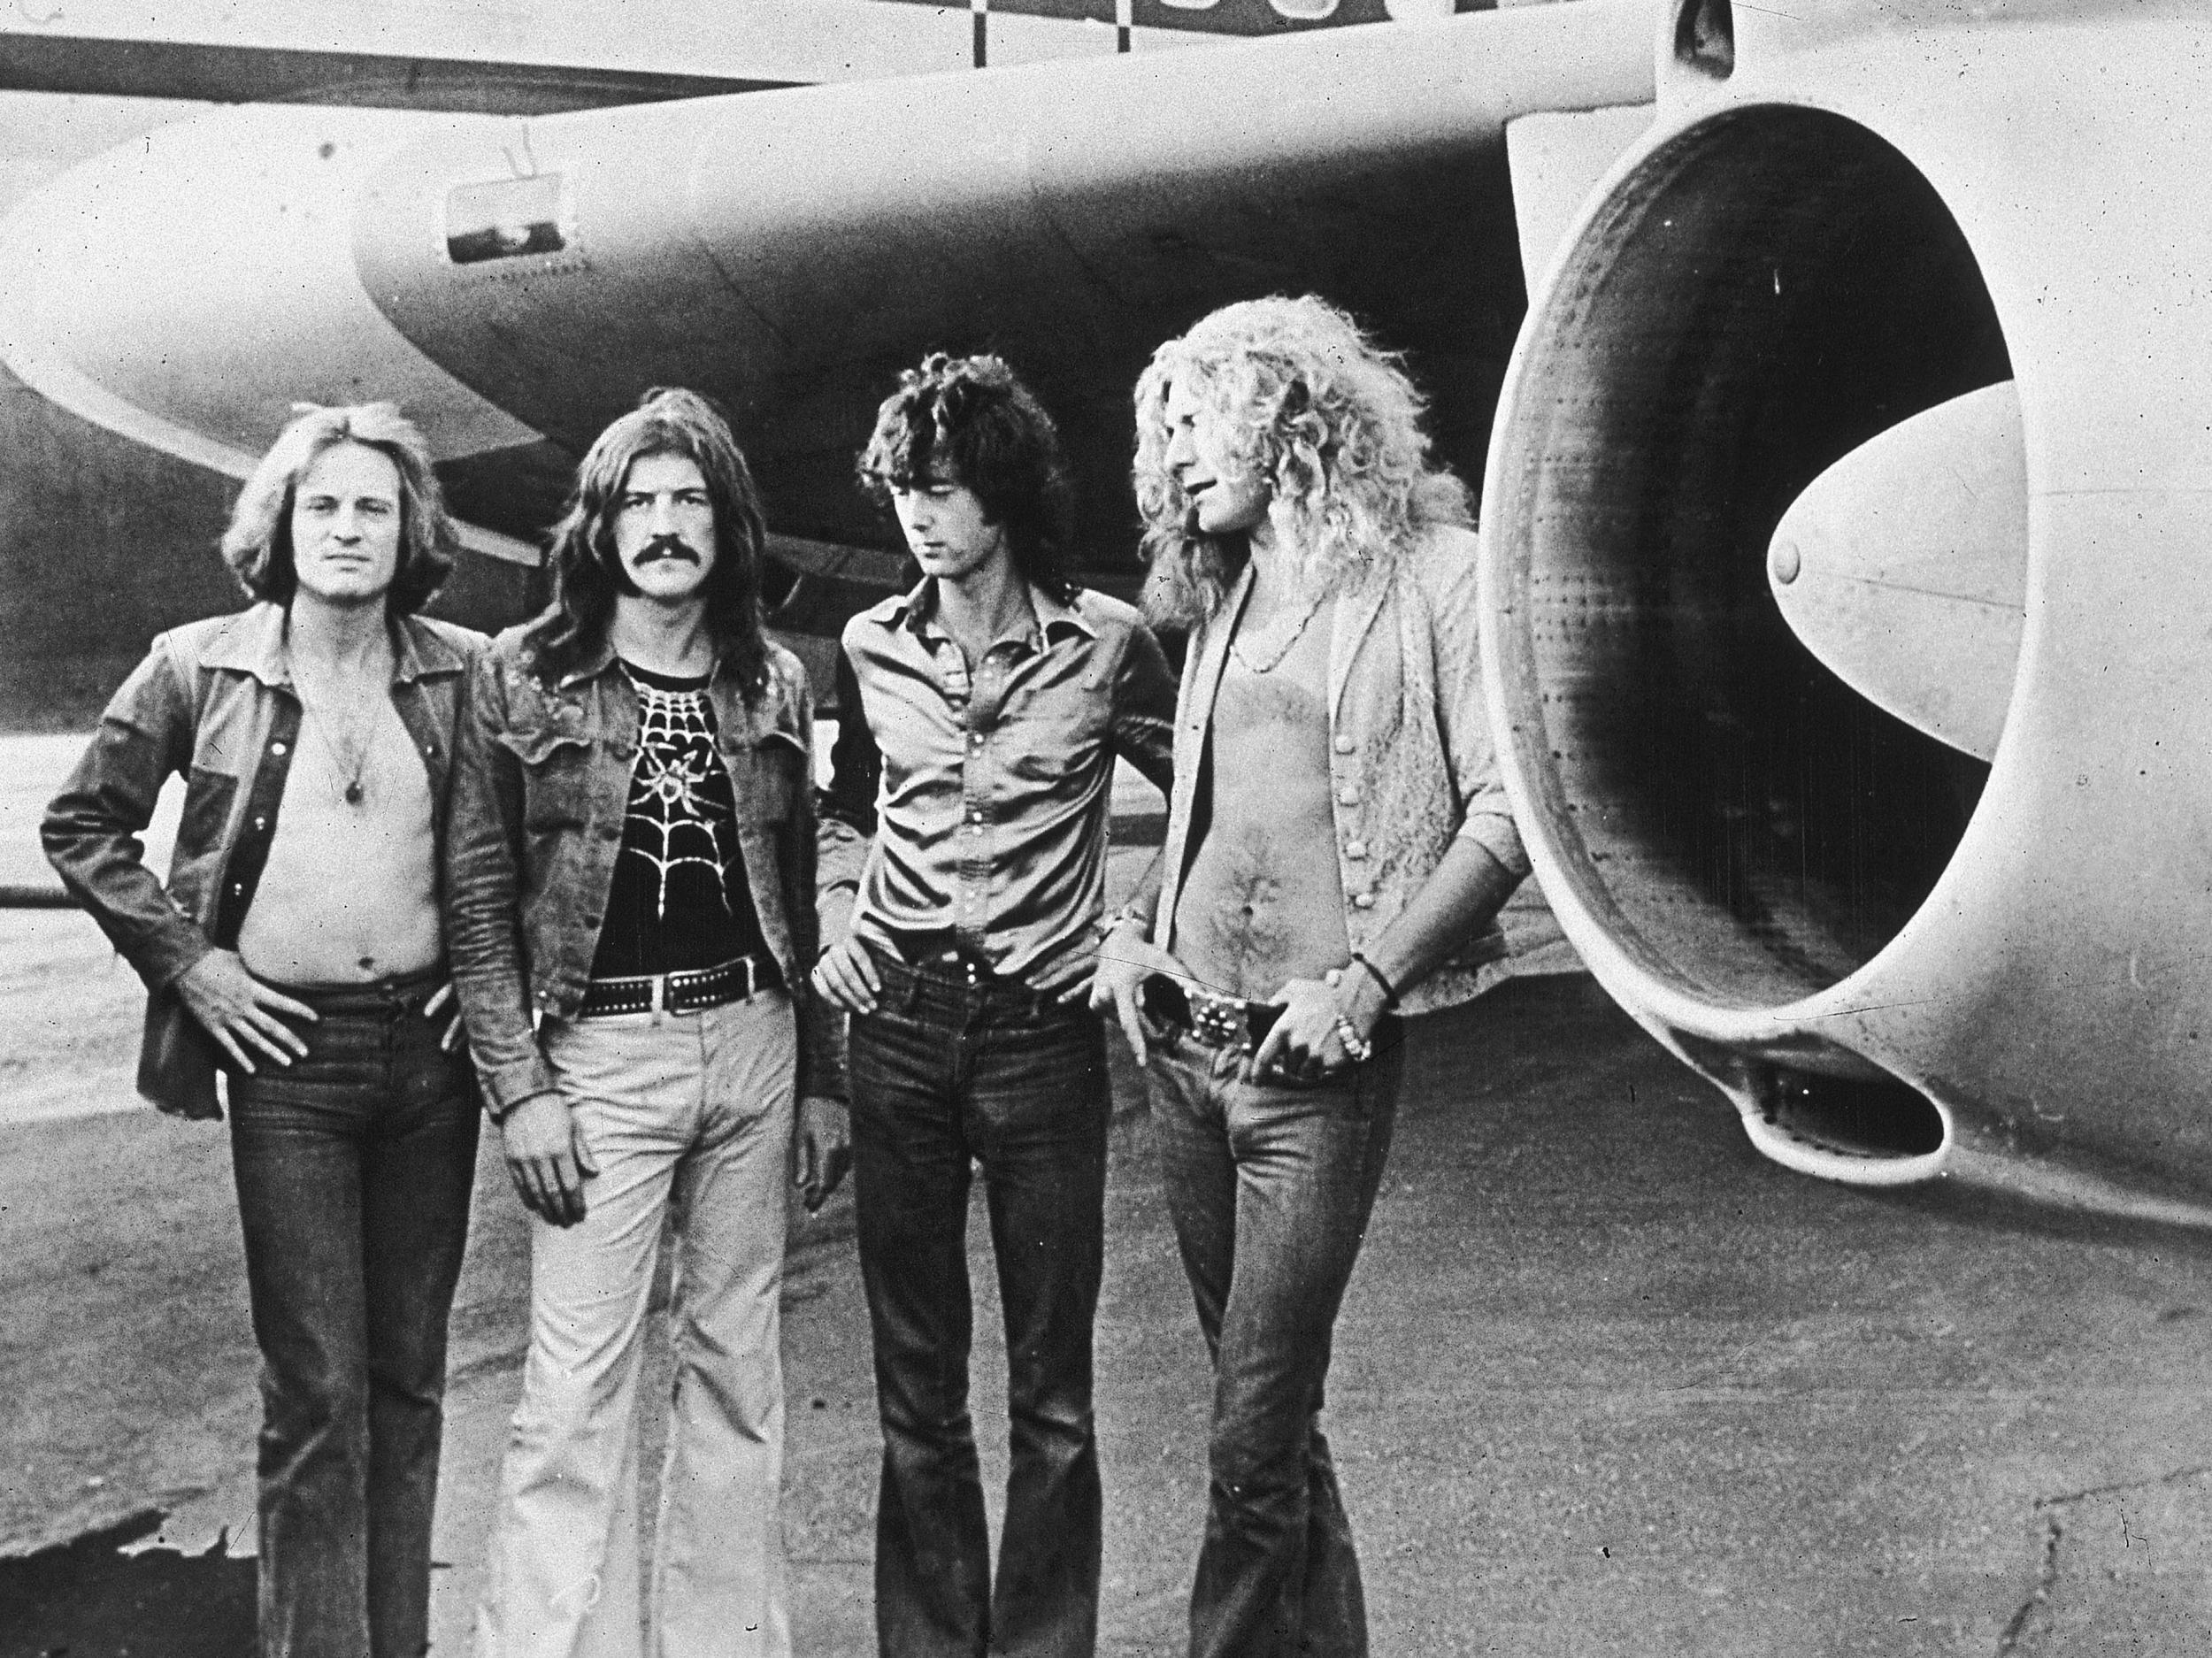 Airway to heaven: (from left) Led Zeppelin’s John Paul Jones, John Bonham, Jimmy Page and Robert Plant in front of their private airliner, The Starship, in 1973